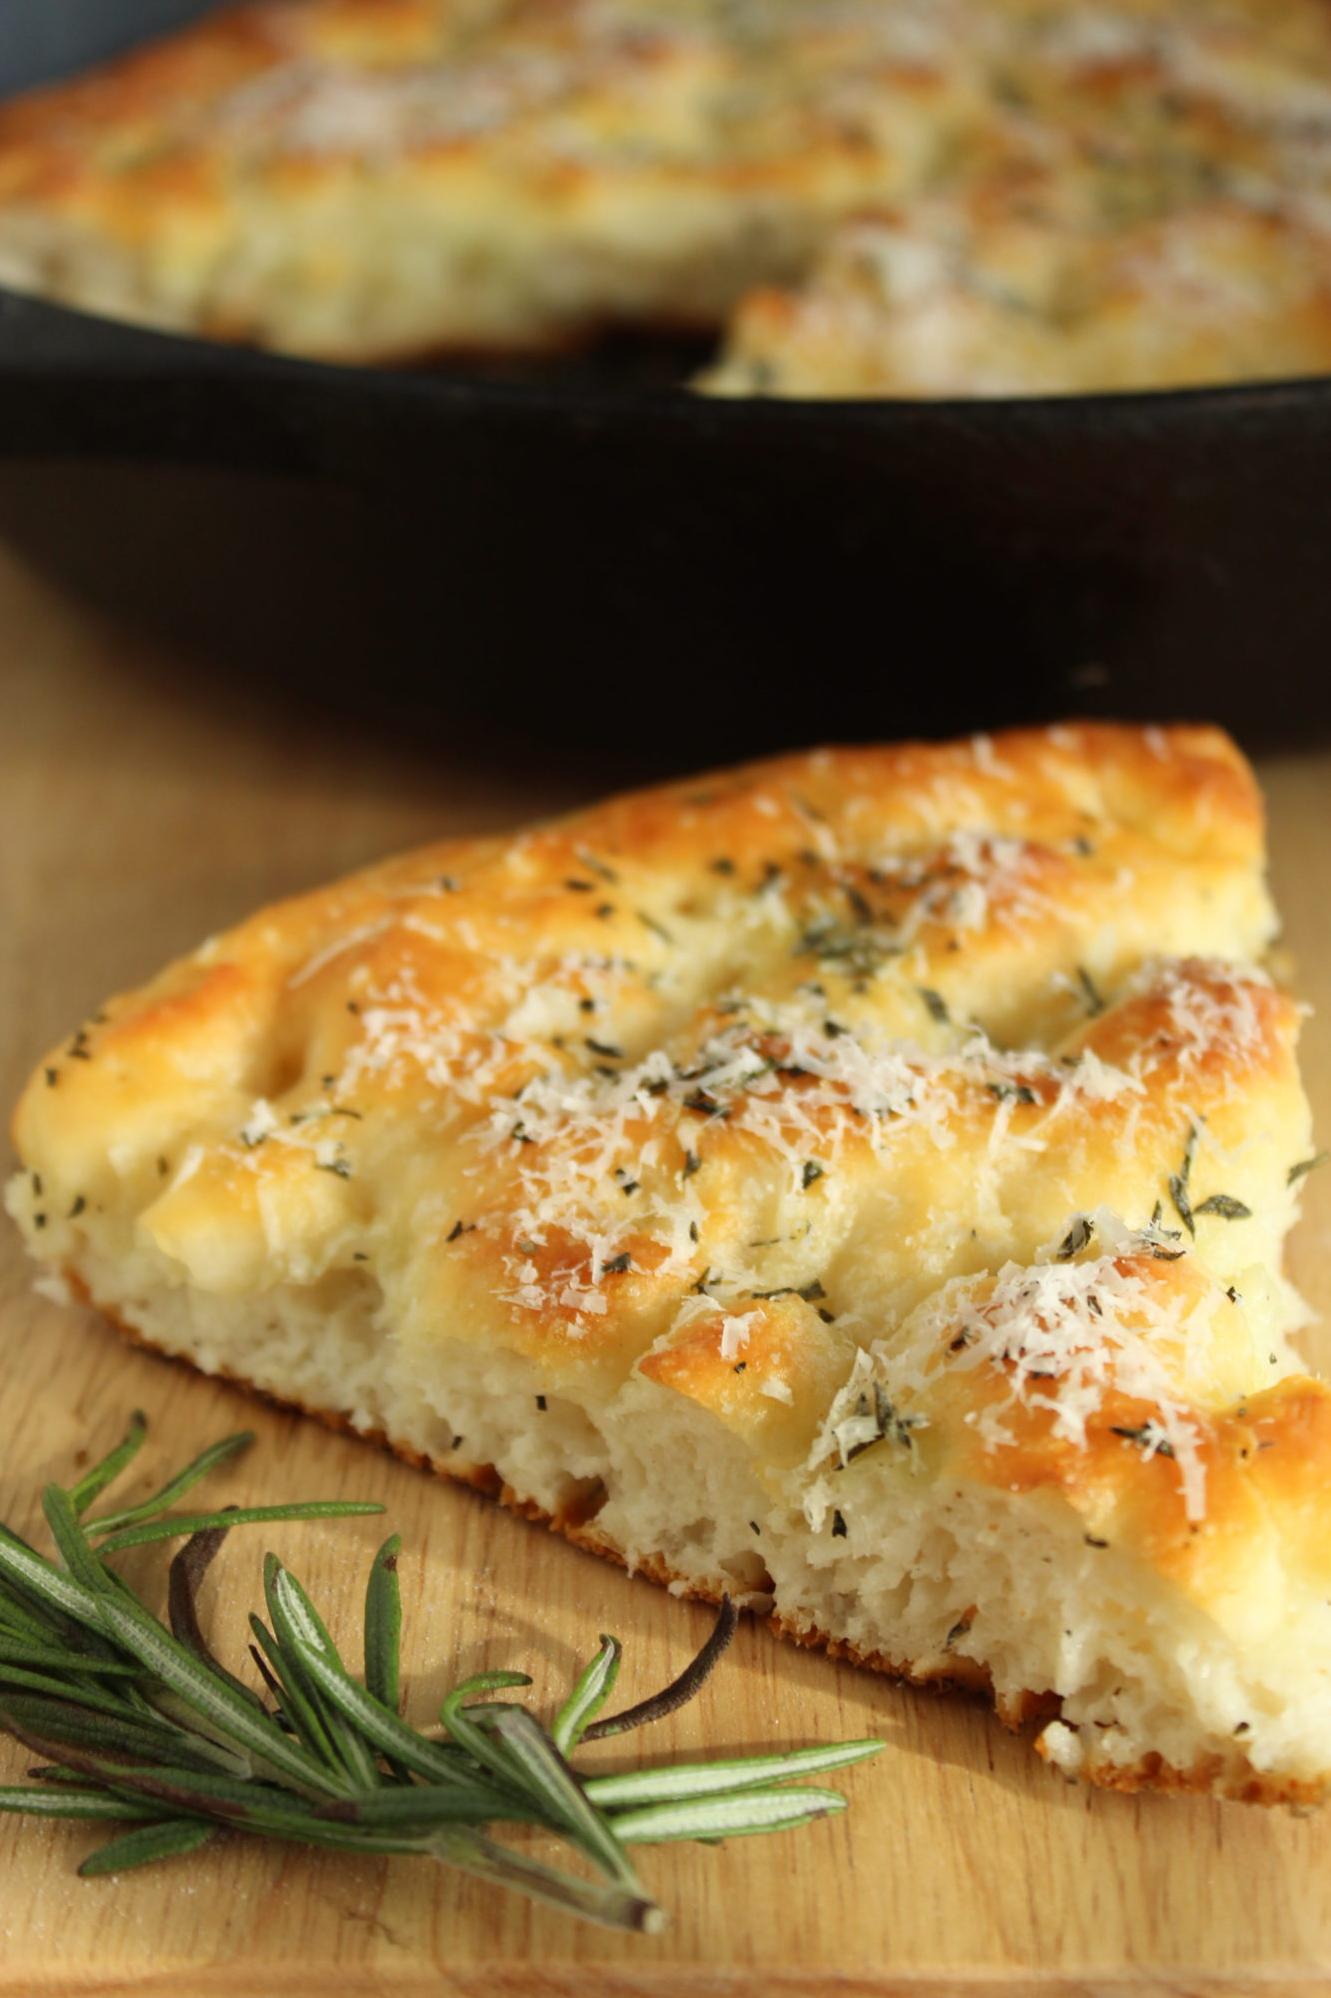  Dig in! This gluten free bread is perfect for a savory snack or meal